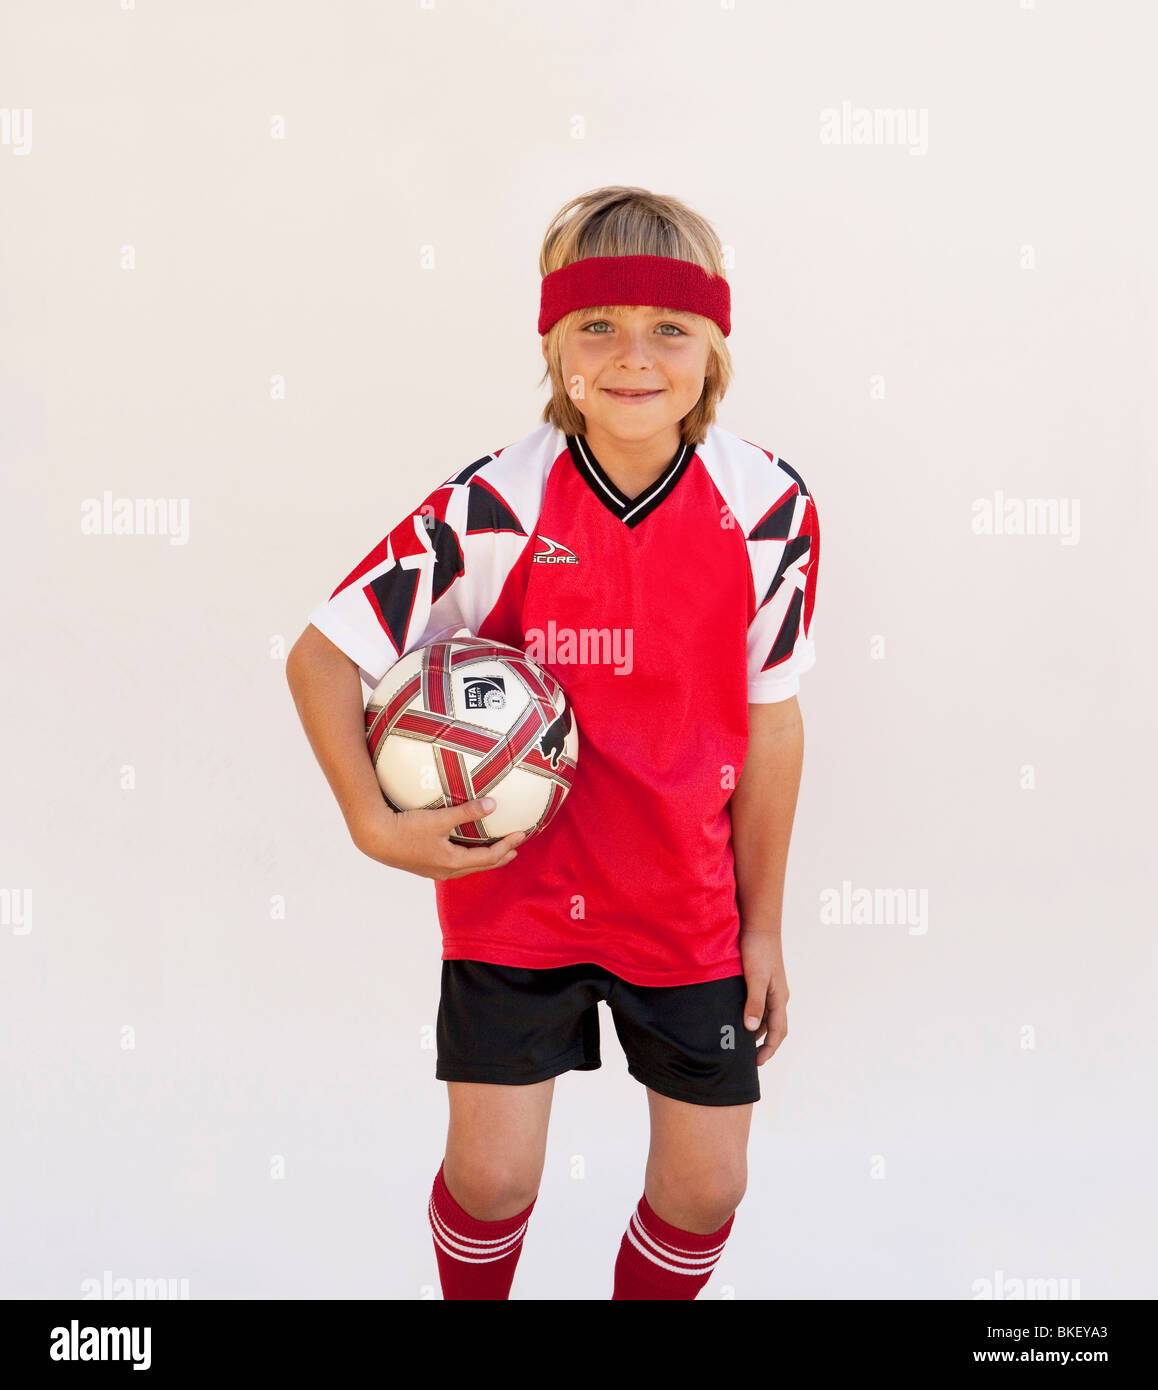 Boy with soccer ball in soccer uniform Stock Photo